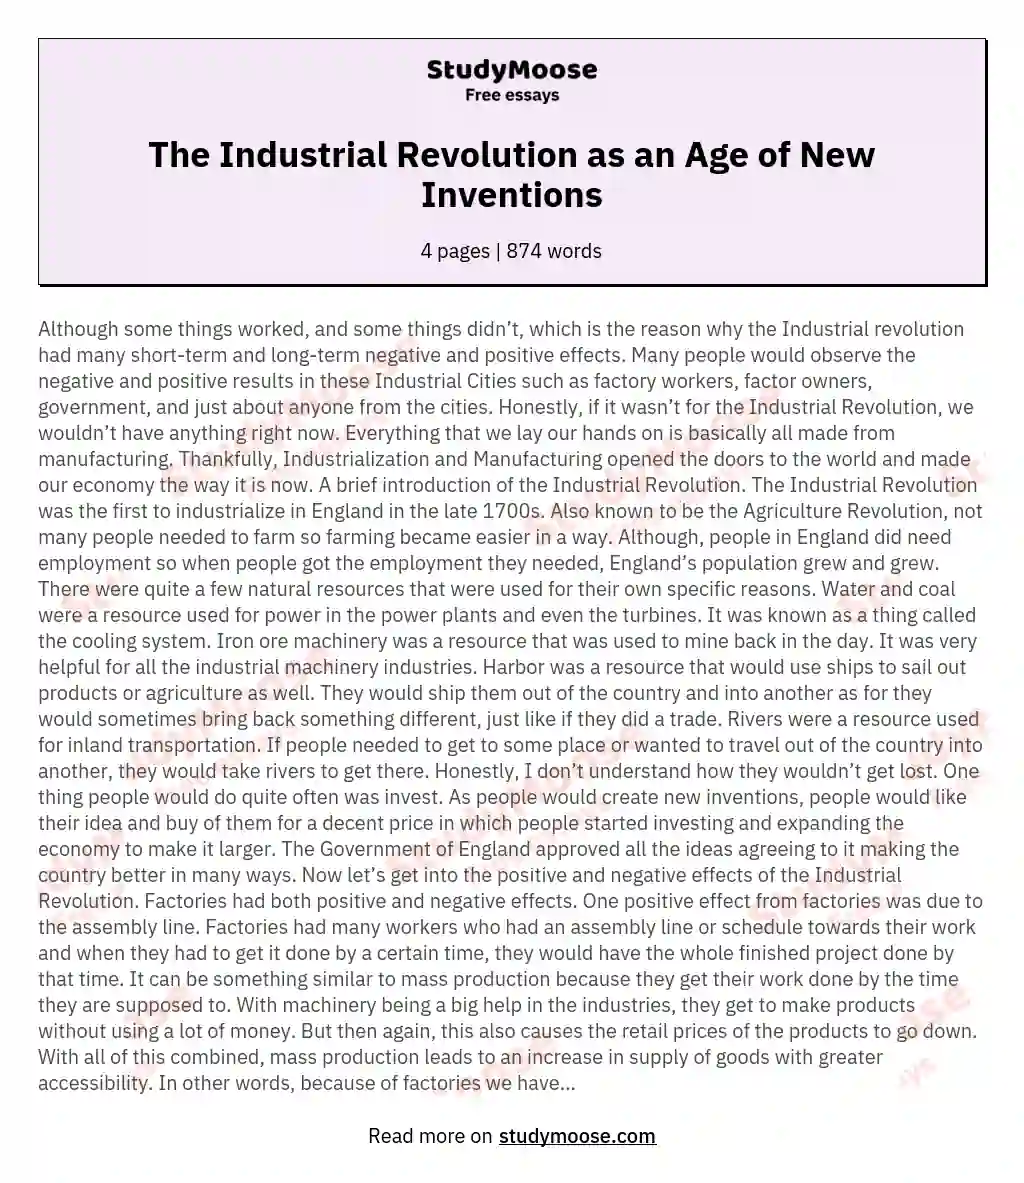 The Industrial Revolution as an Age of New Inventions essay